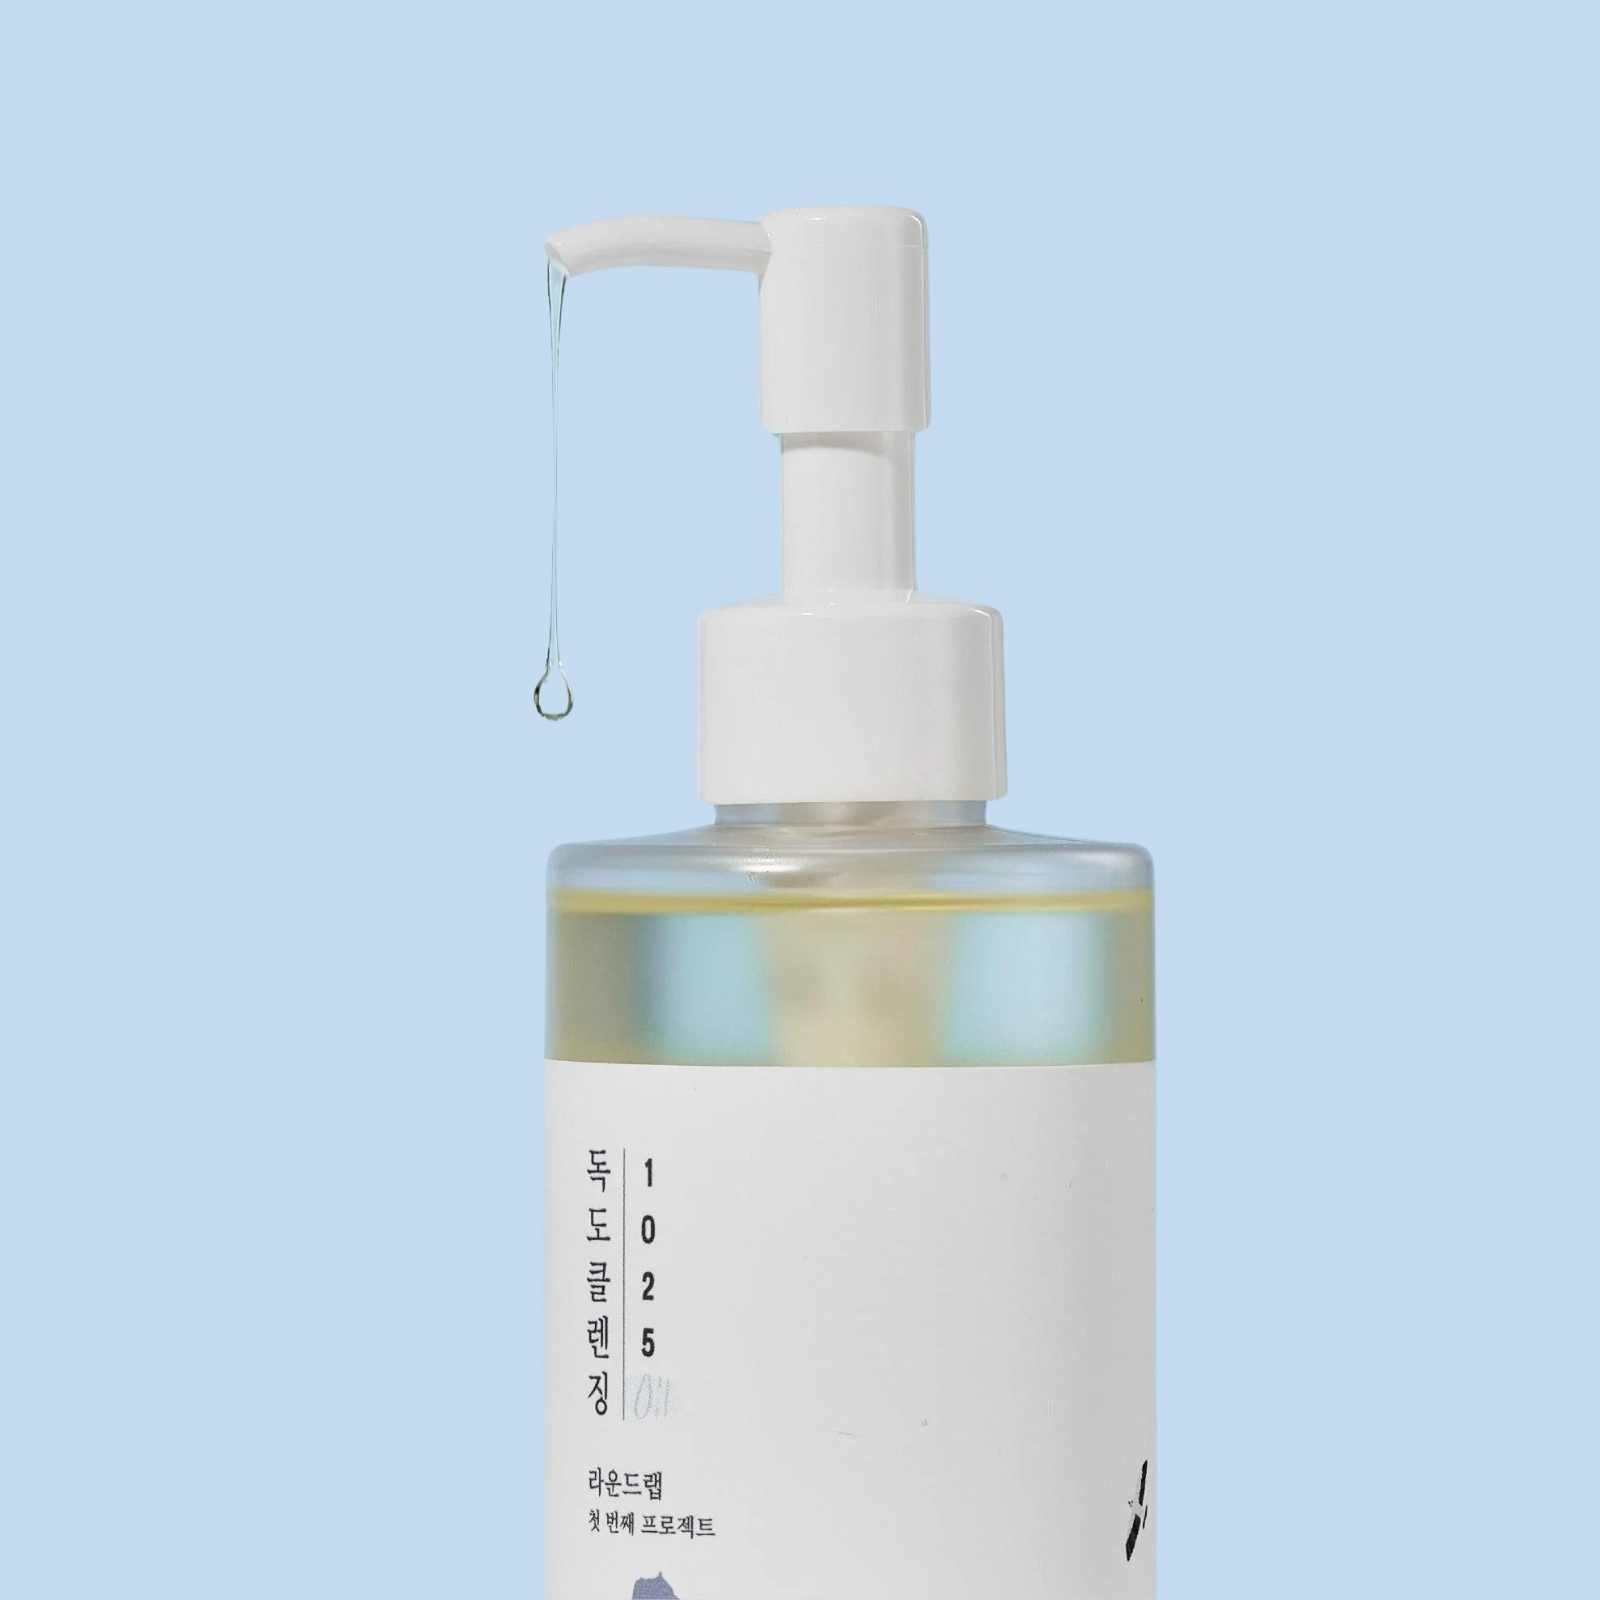 Gentle hydrophilic makeup removal oil by Round Lab (Round Lab 1025 Dokdo Cleansing Oil)